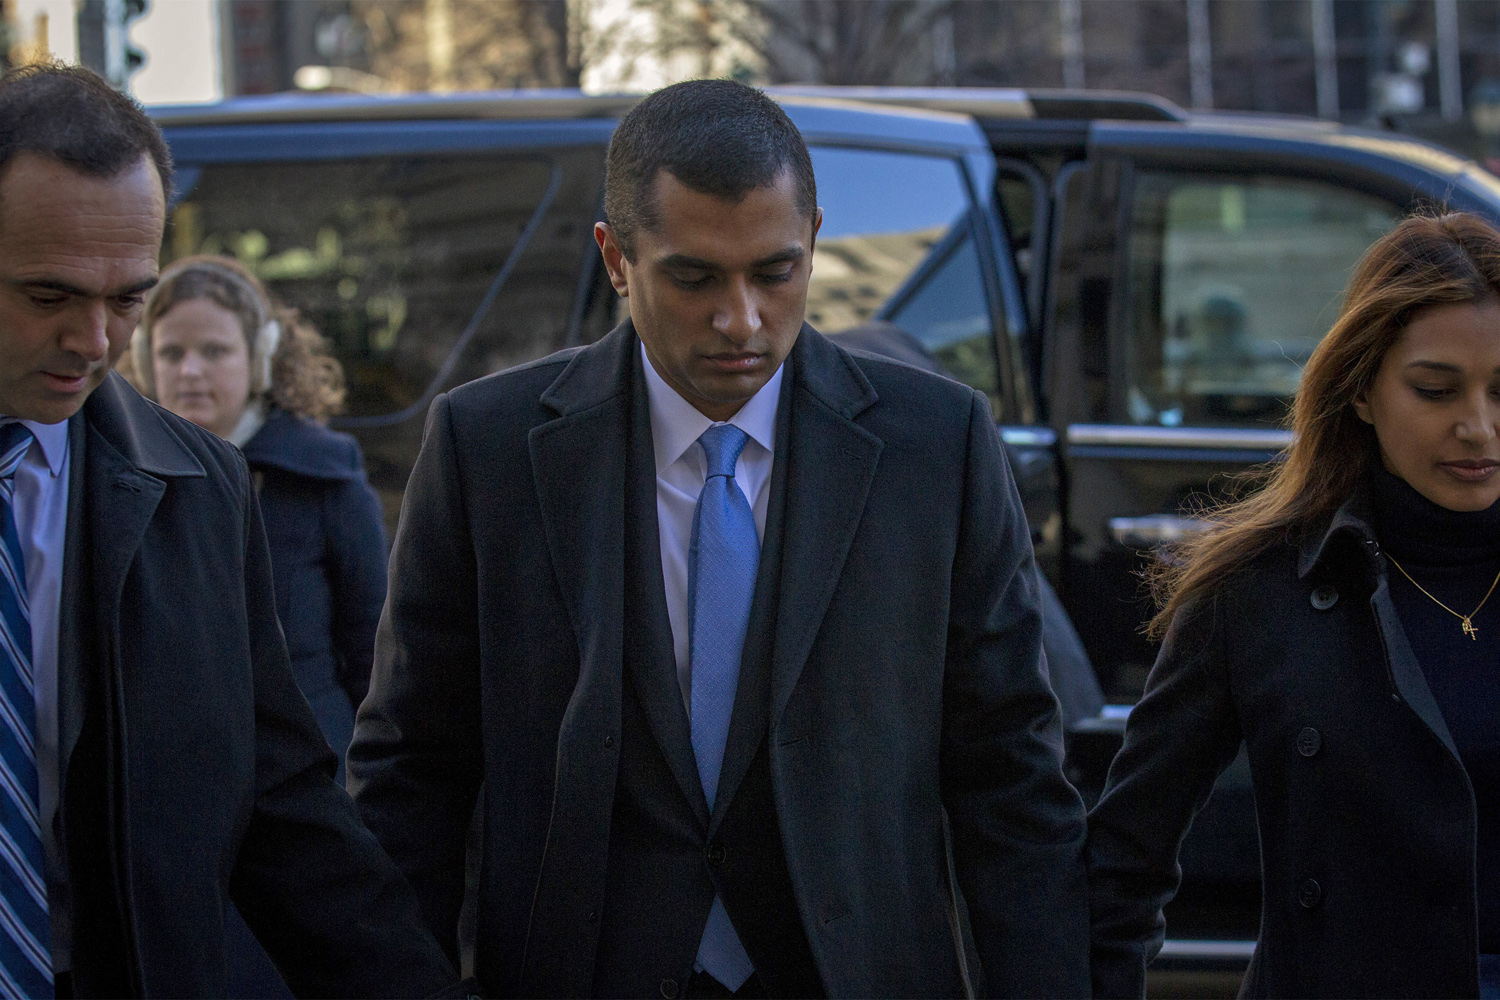 Former SAC Capital portfolio manager Mathew Martoma (C) arrives at the Manhattan Federal Courthouse with his lawyer in New York, January 7, 2014. Martoma is charged with using confidential information provided by two doctors involved in clinical trial to trade in drug companies Elan Corp Plc and Wyeth, which is now owned by Pfizer Inc. (Brendan McDermid&mdash;Reuters)